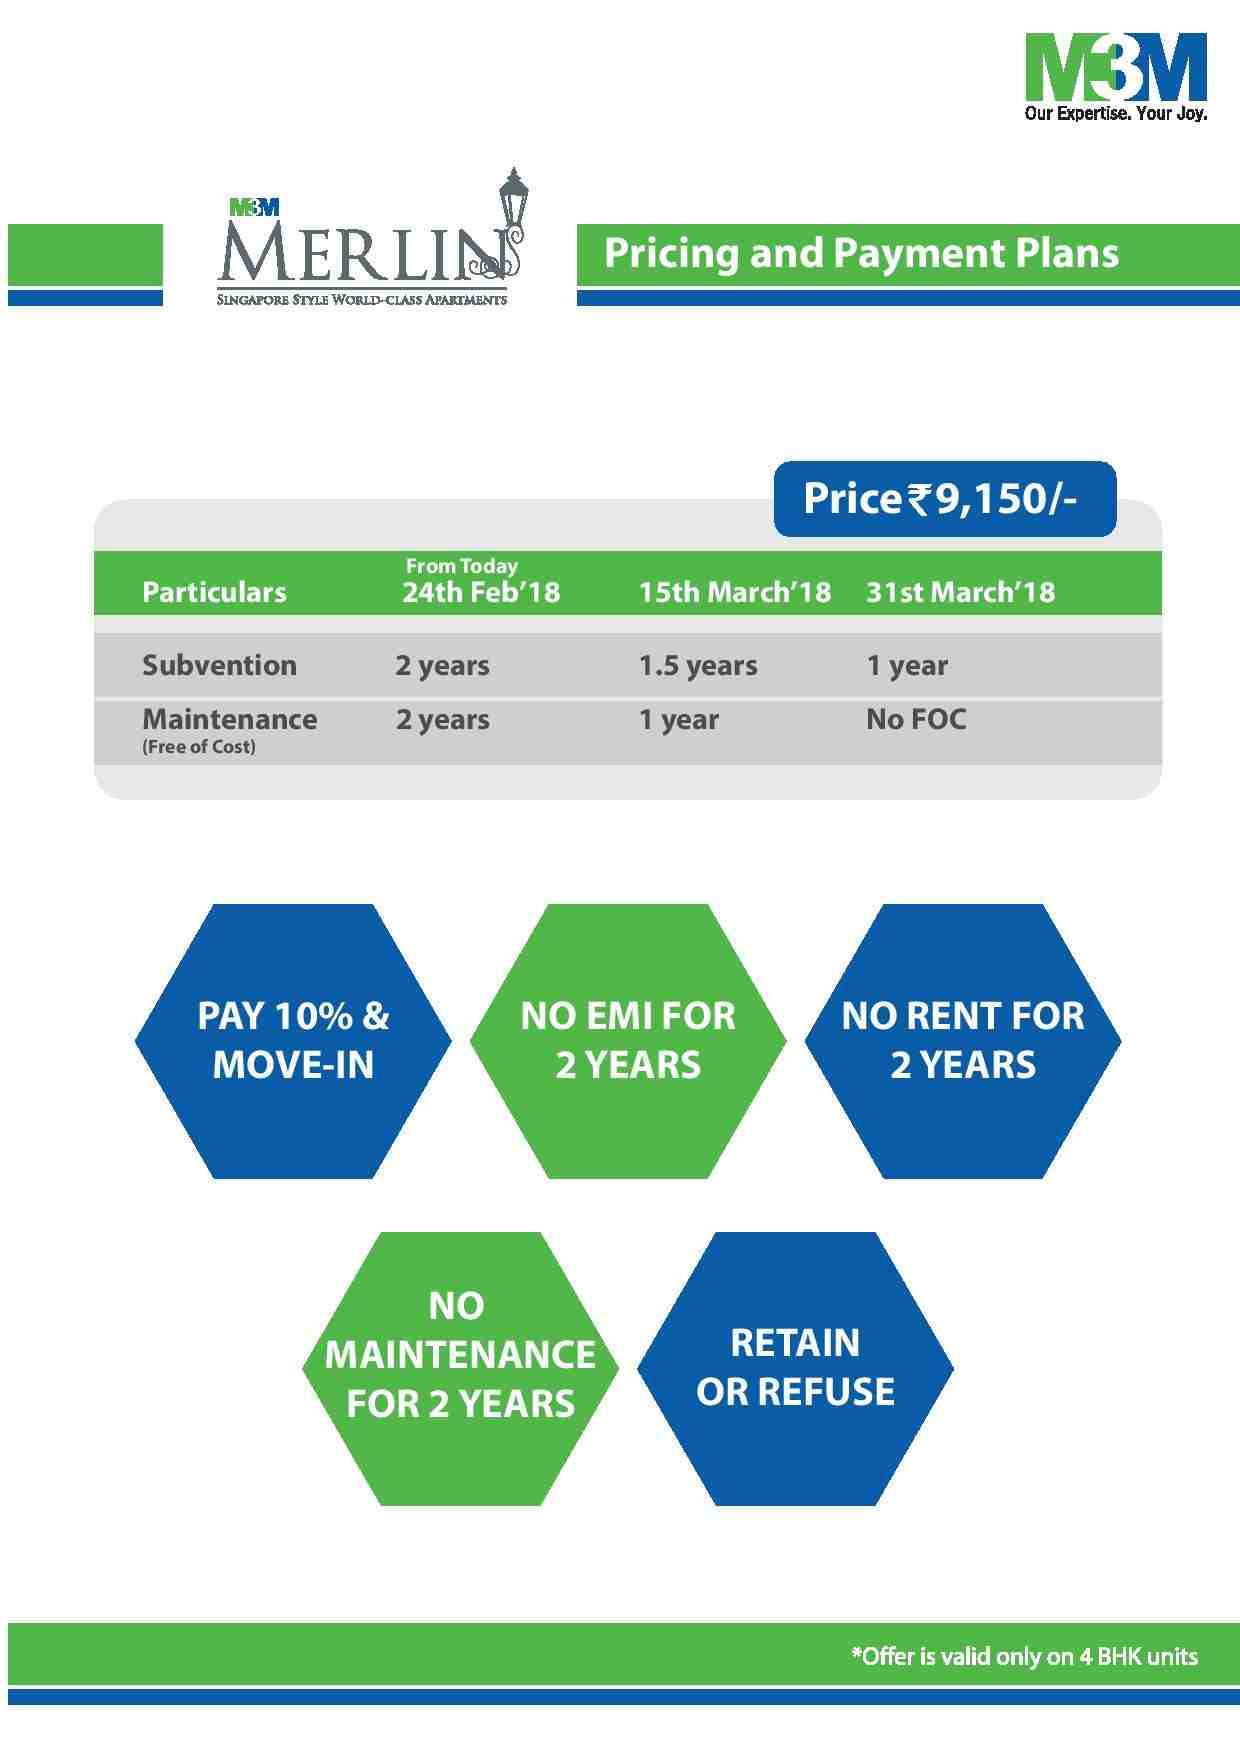 Pay no maintenance for 2 years at M3M Merlin in gurgaon Update